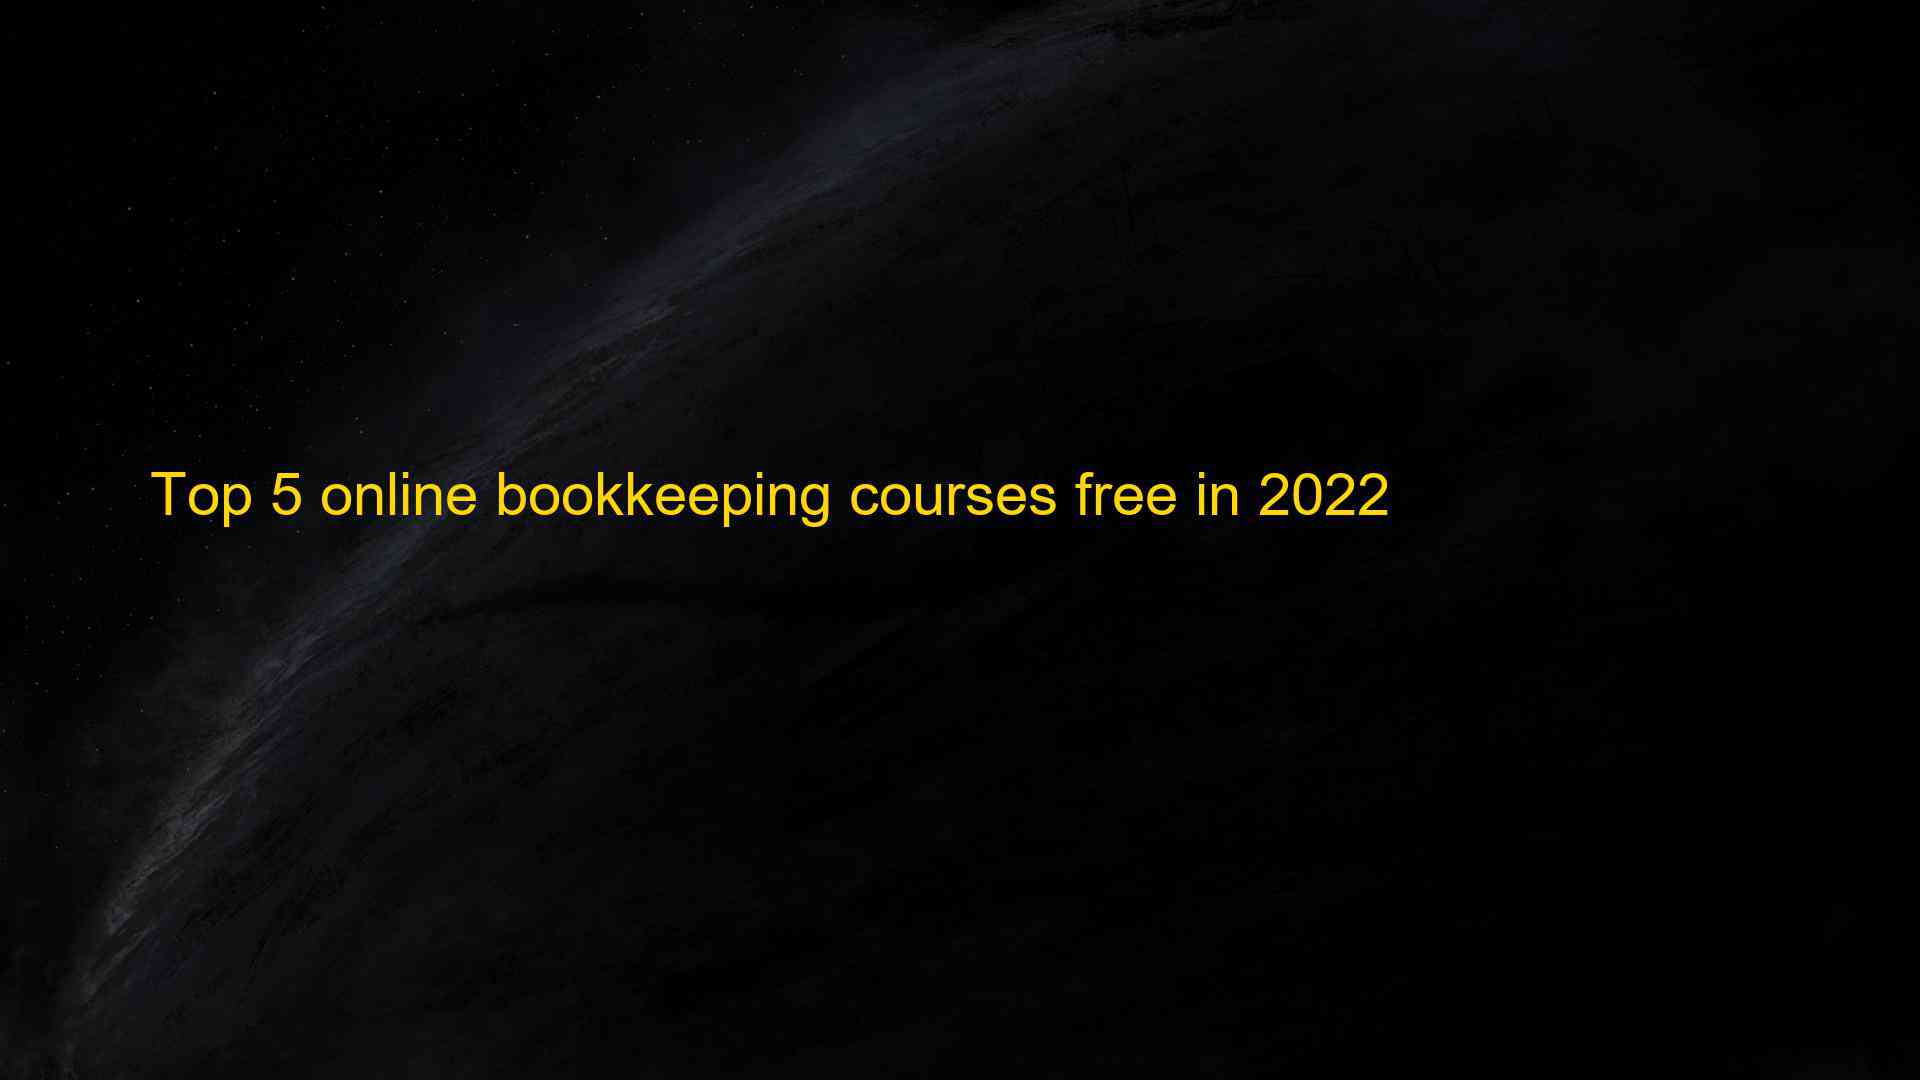 Top 5 online bookkeeping courses free in 2022 1661793985